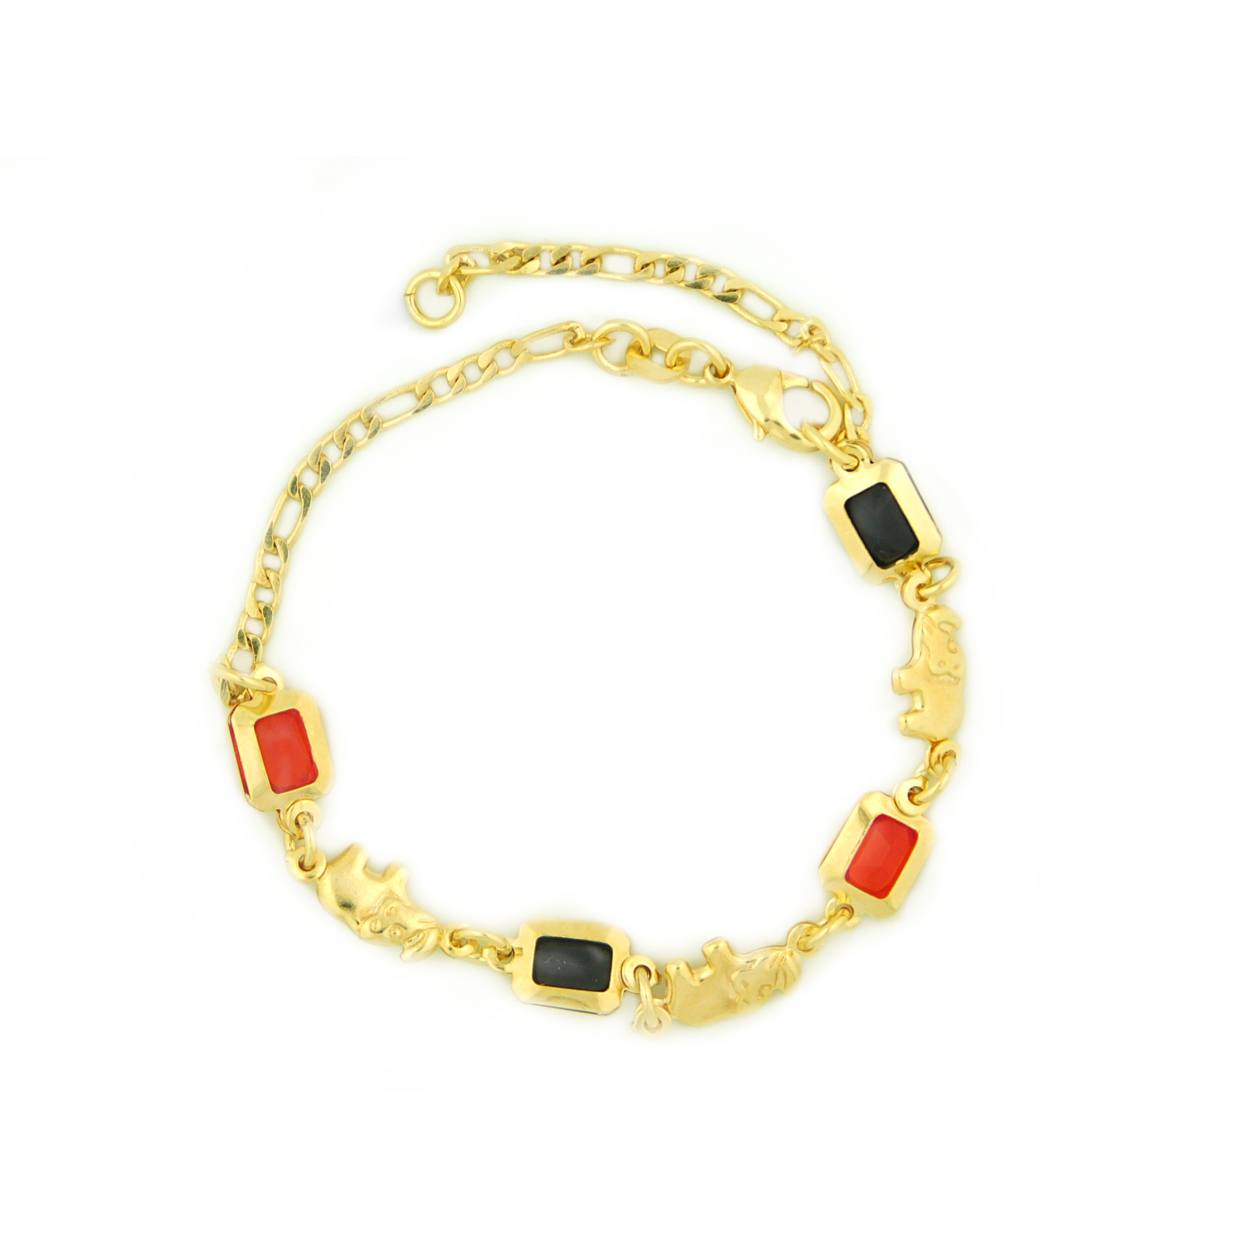 RM 14k Gold Filled Yellow Rectangle Red And Black Elephant Bracelet 5.5